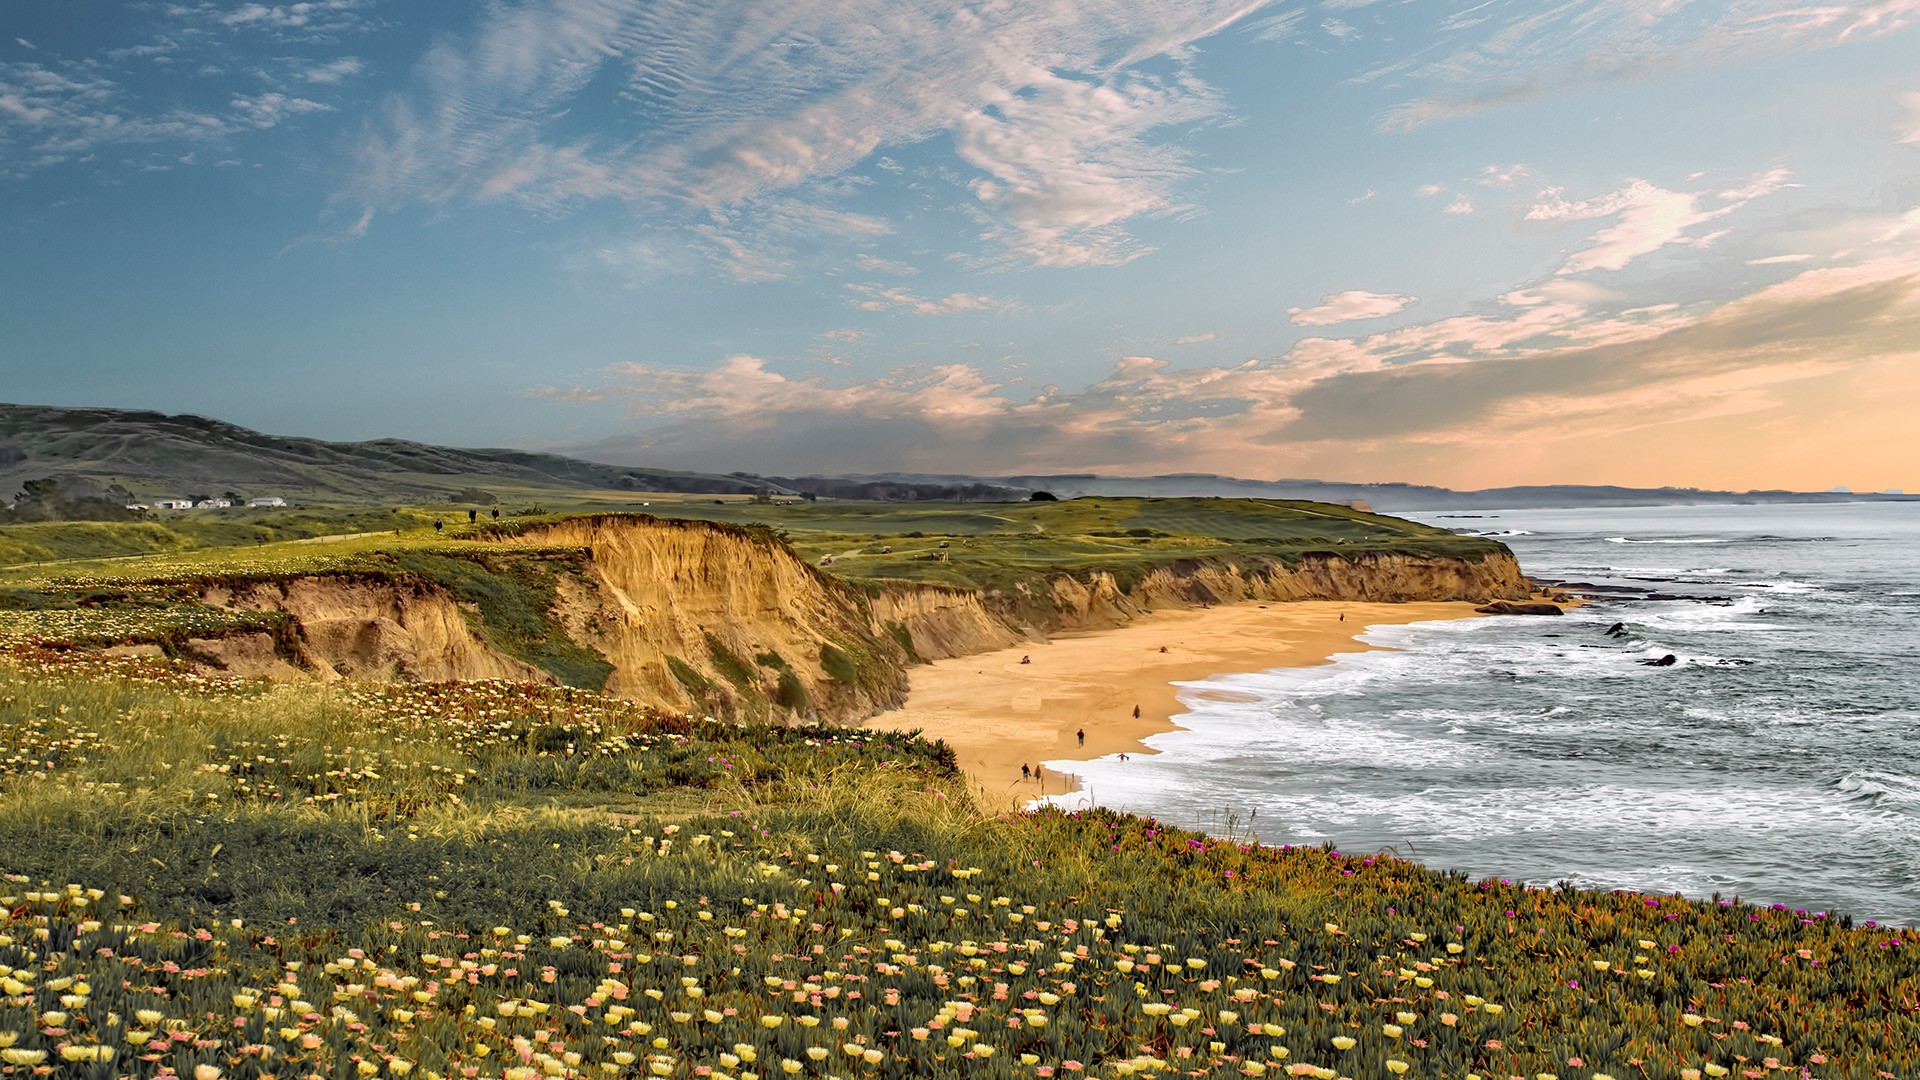 General 1920x1080 nature landscape flowers yellow flowers beach coast clouds sky sunset people mountains water sea California USA Pacific Ocean